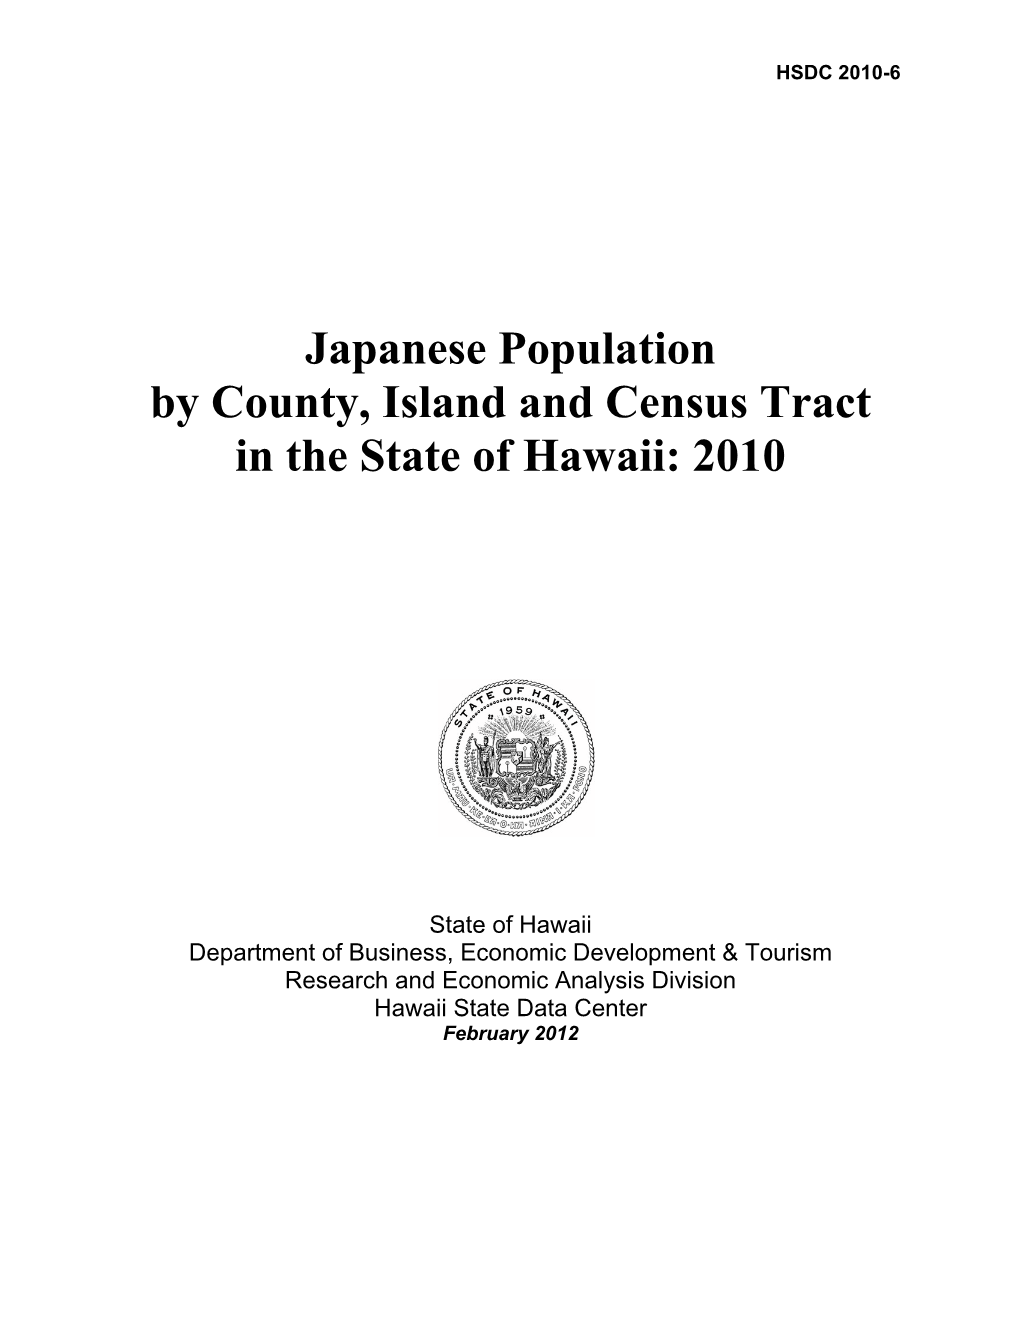 Japanese Population by County, Island and Census Tract in the State of Hawaii: 2010